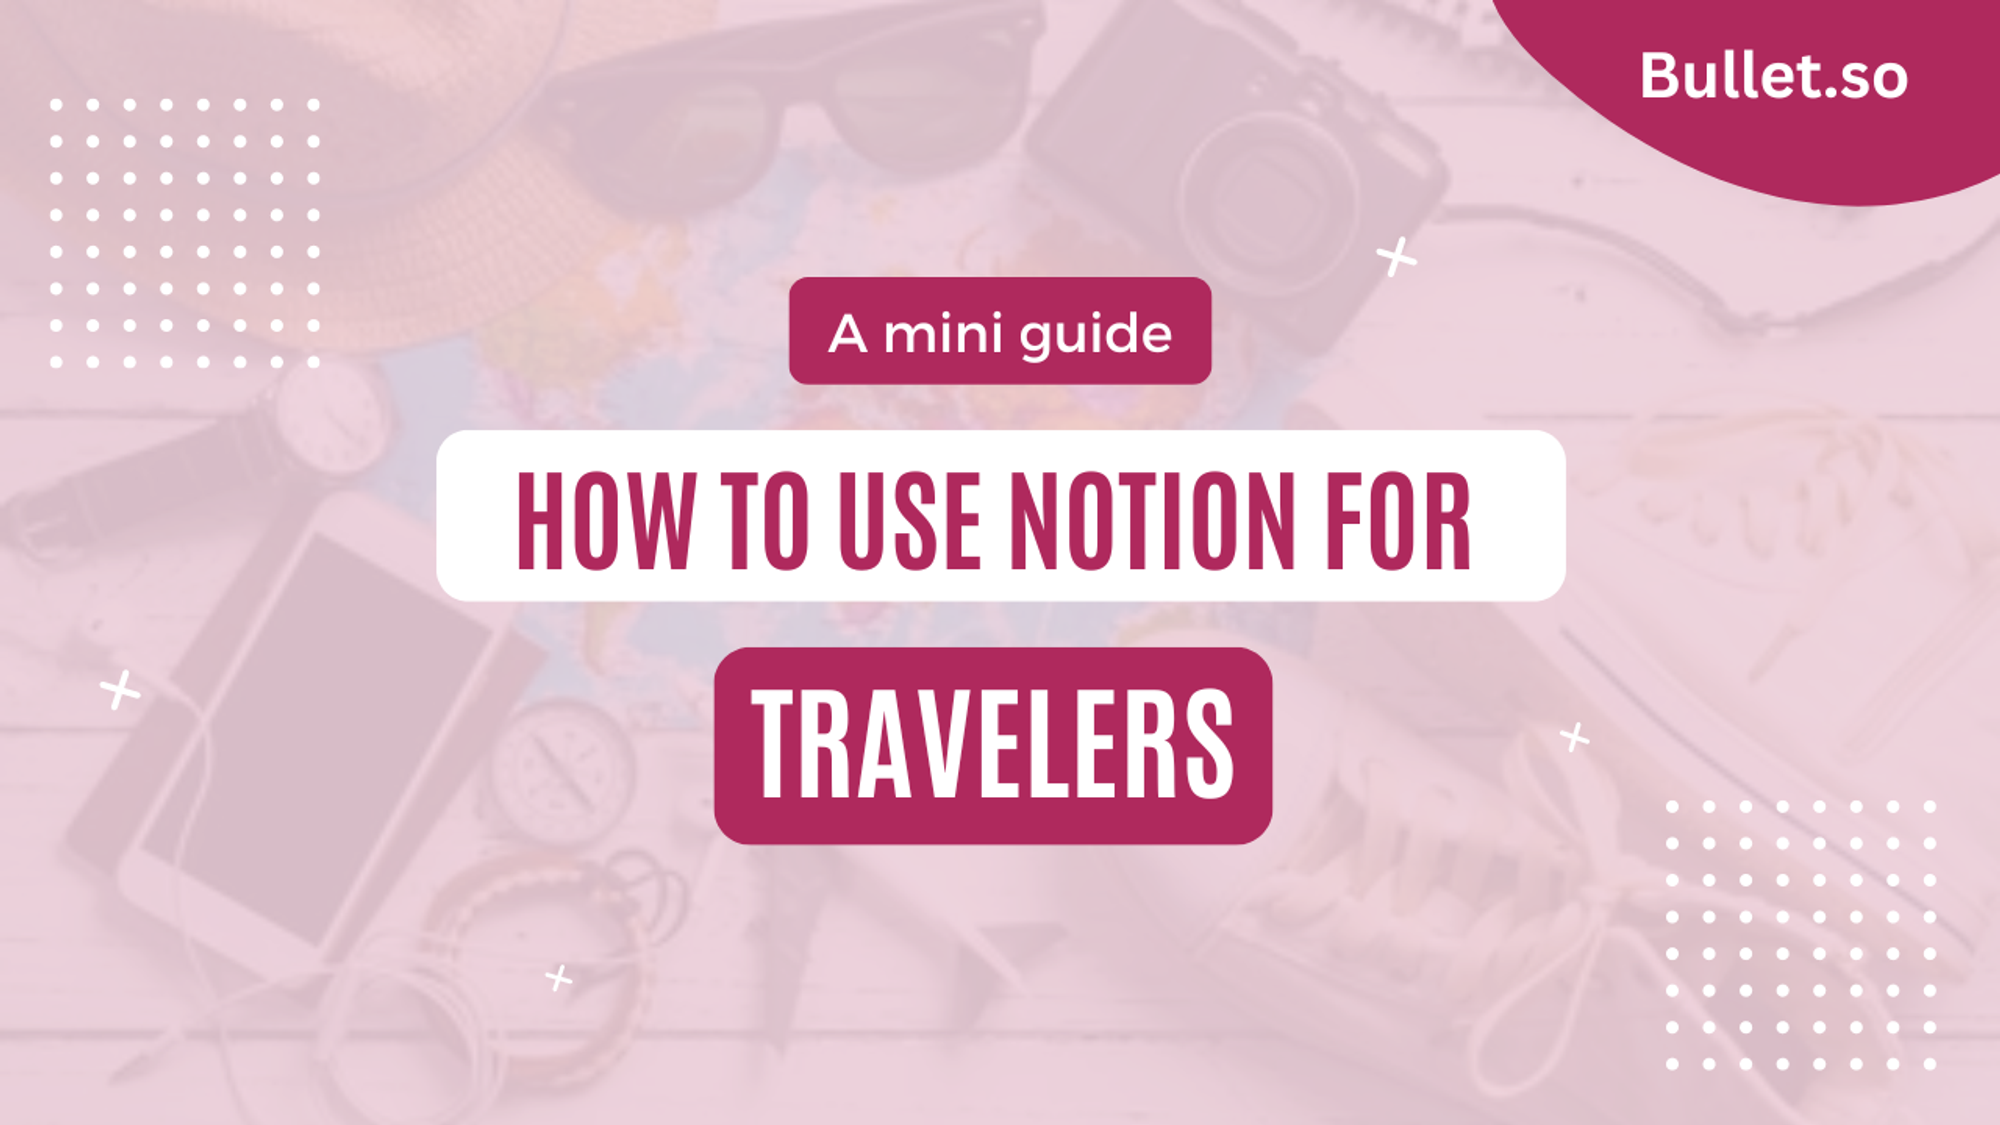 Why is Notion the traveler’s dream organizer?